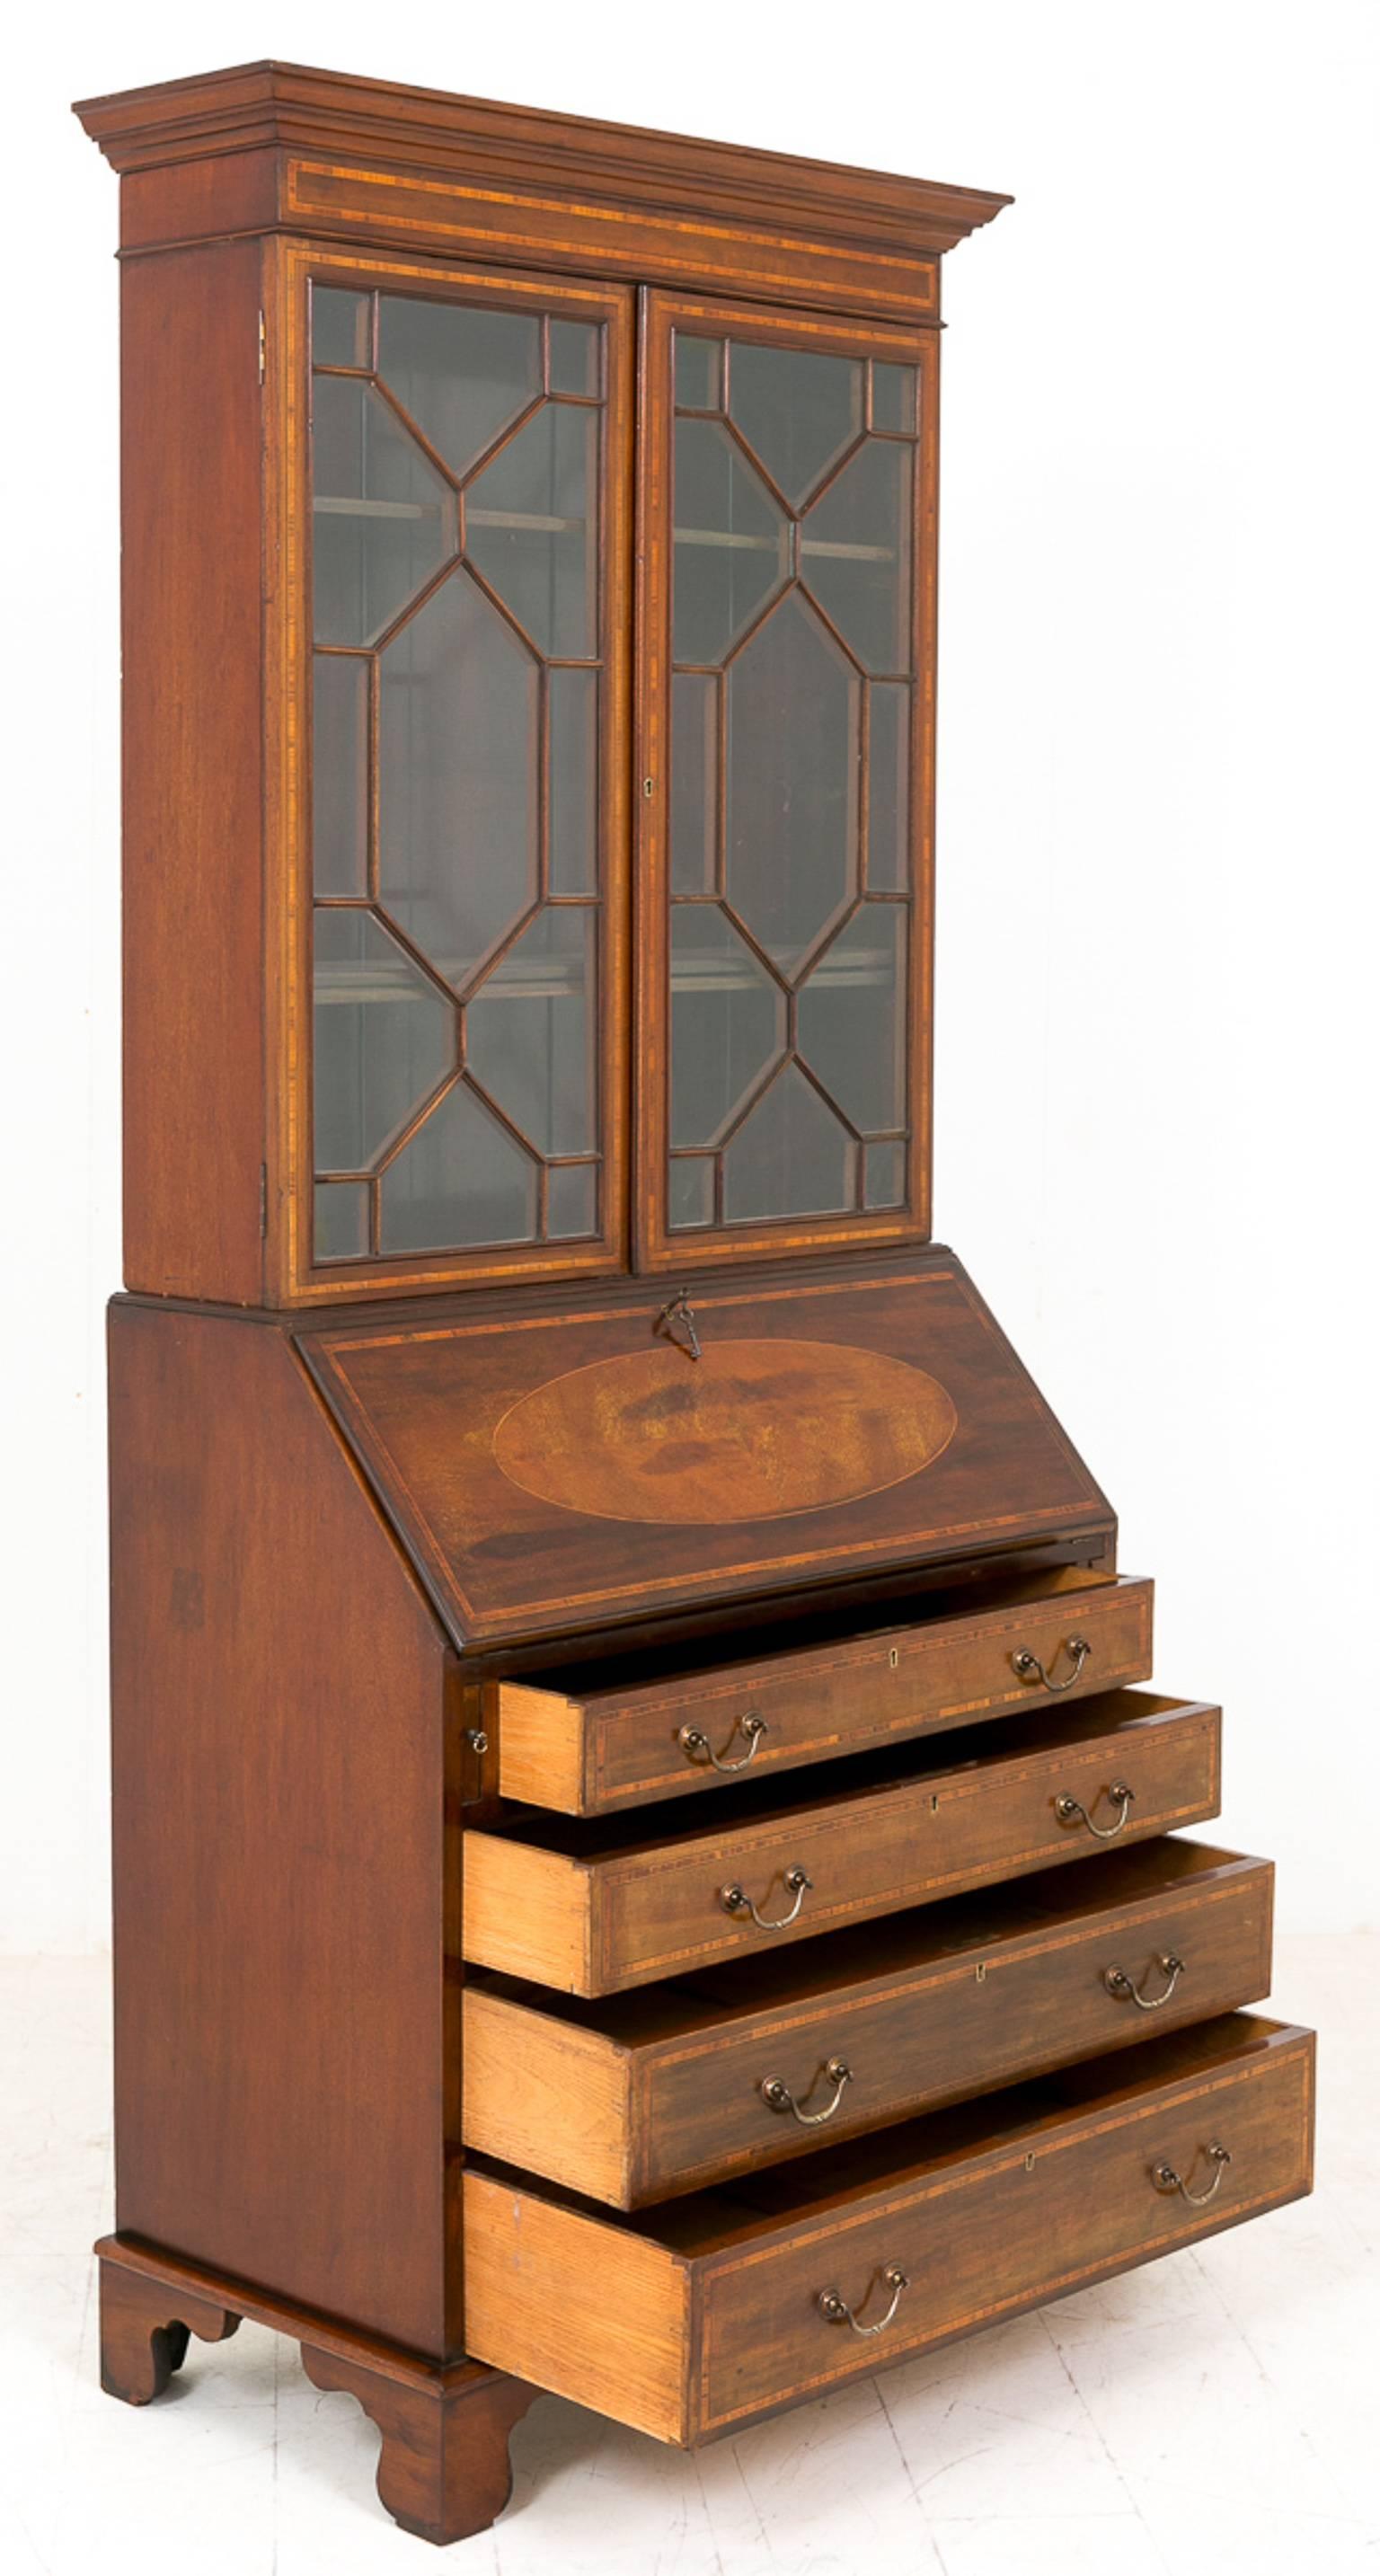 Sheraton Revival mahogany bureau bookcase.
Featuring bracket feet.
Four oak lined drawers with original brass handles.
The fall with an oval inlay opening to reveal an arrangement of drawers, pigeon holes and a central door.
Behind the astragal